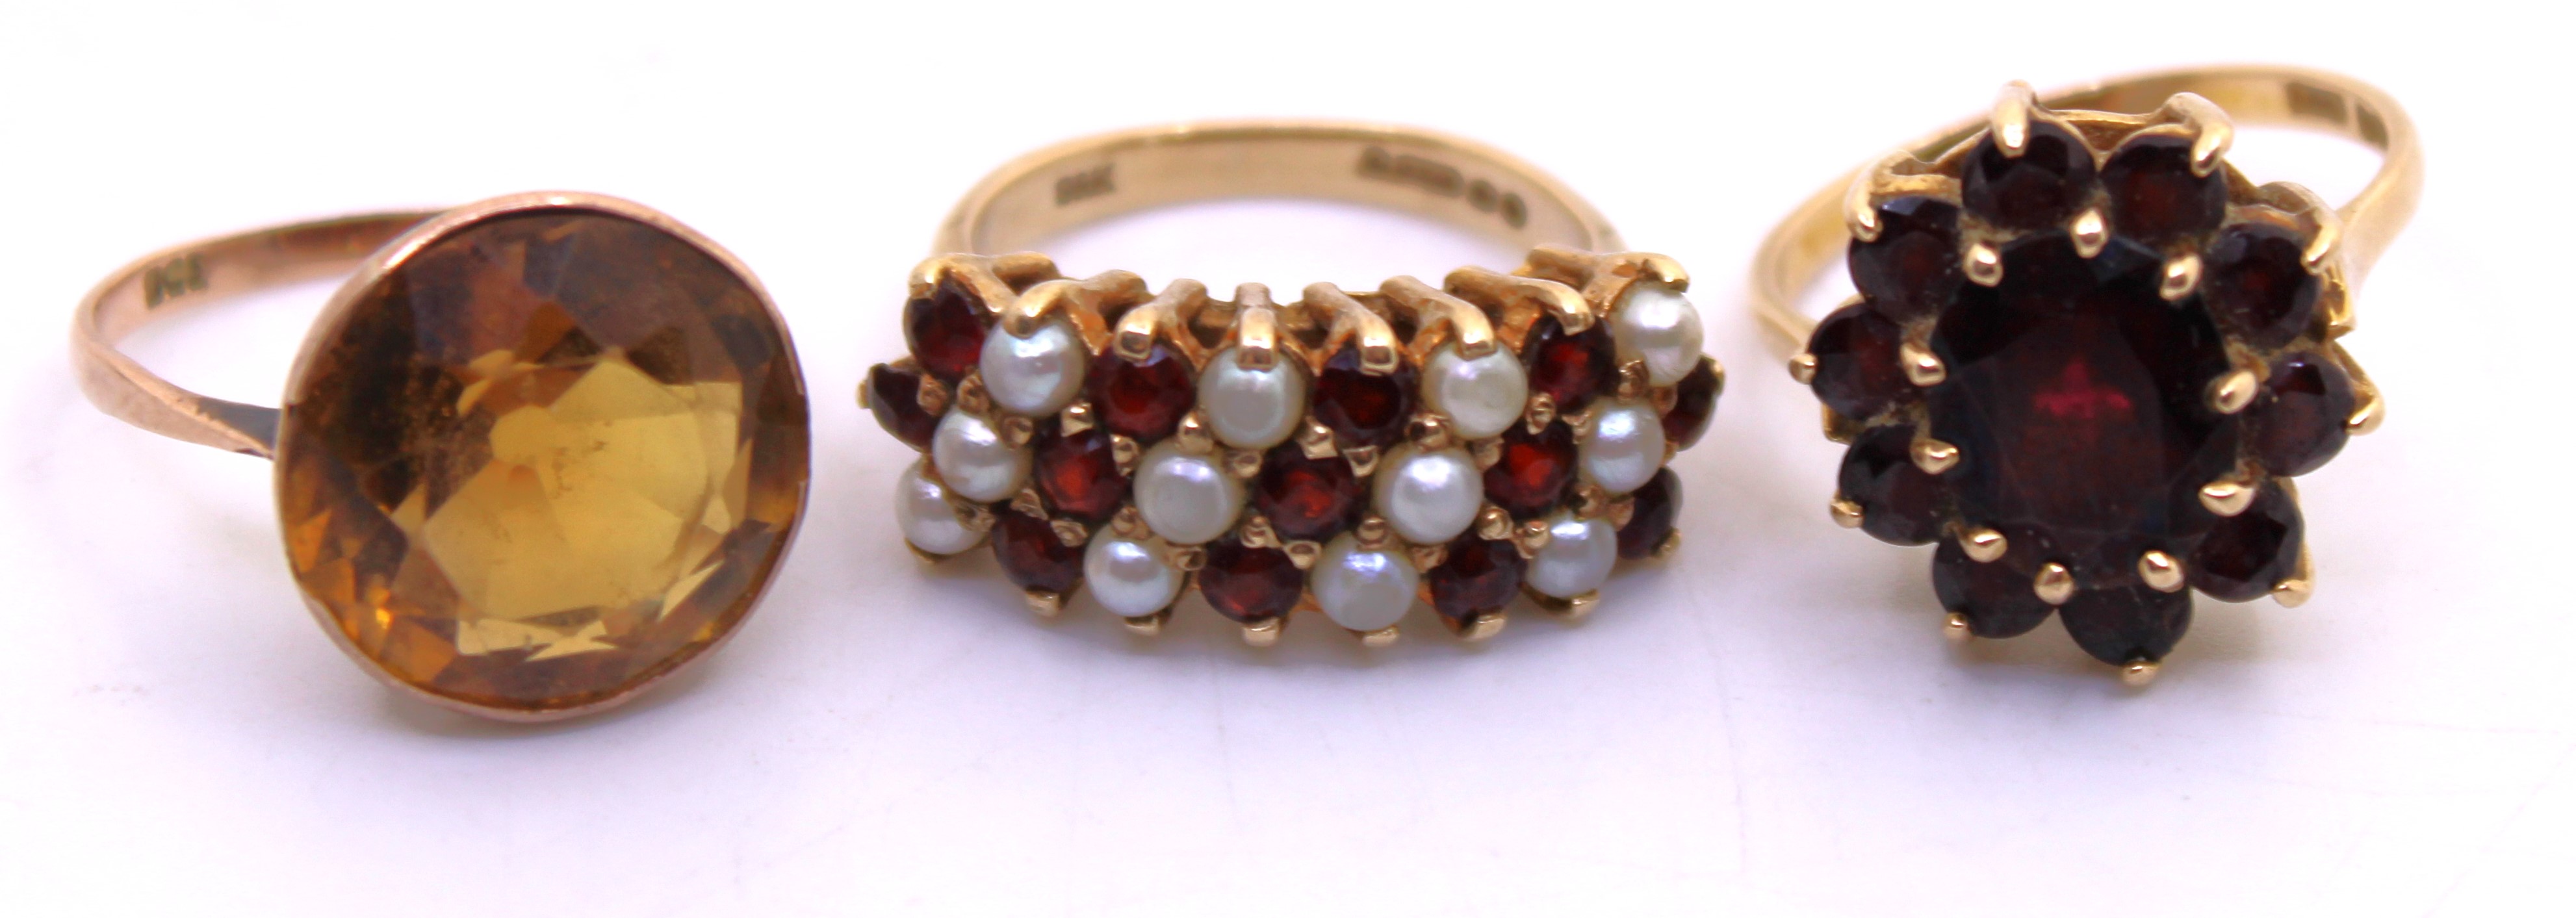 Group of three 9ct Gold dress rings.  To include a 9ct Gold Garnet Cluster ring, a 9ct Gold Cultured